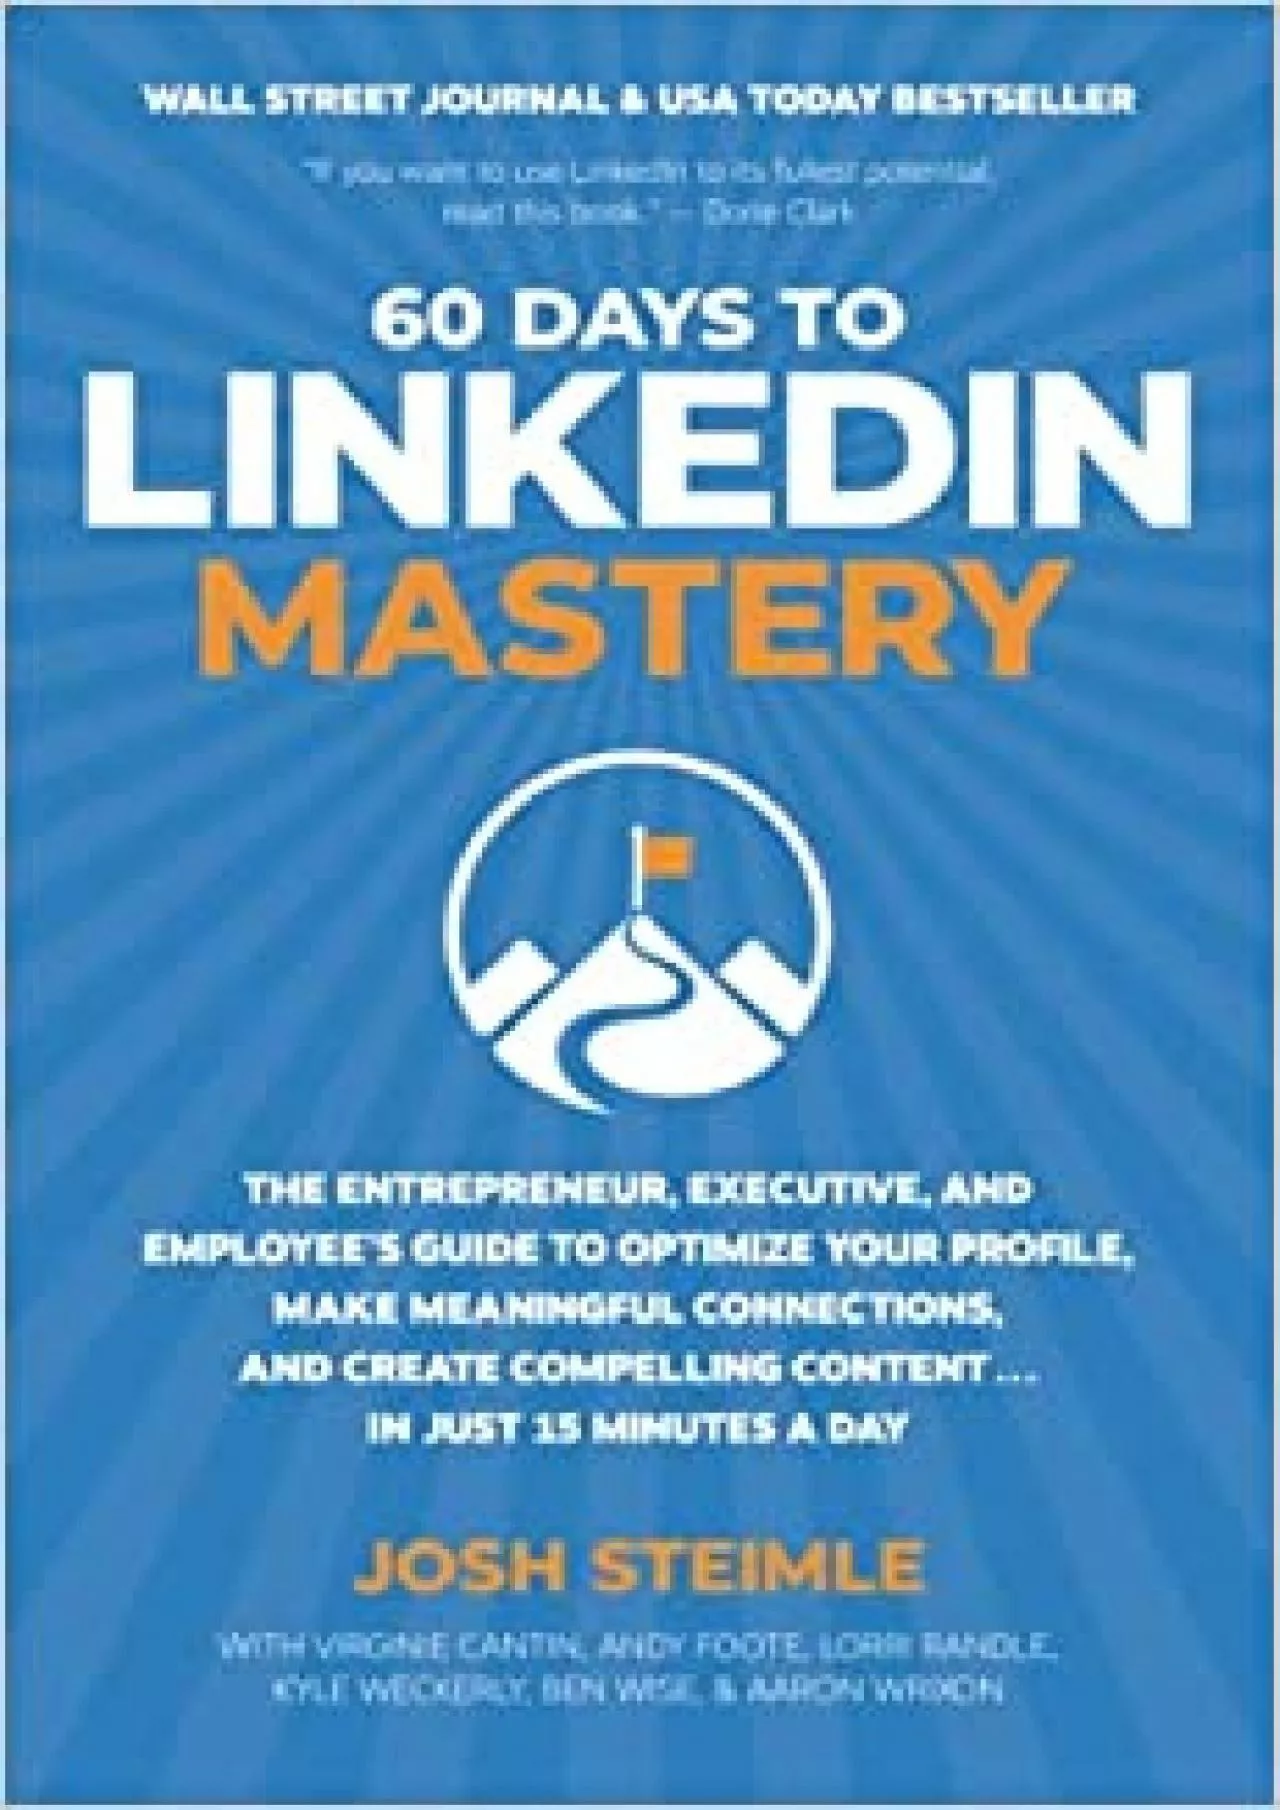 60 Days to LinkedIn Mastery The Entrepreneur, Executive, and Employee’s Guide to Optimize